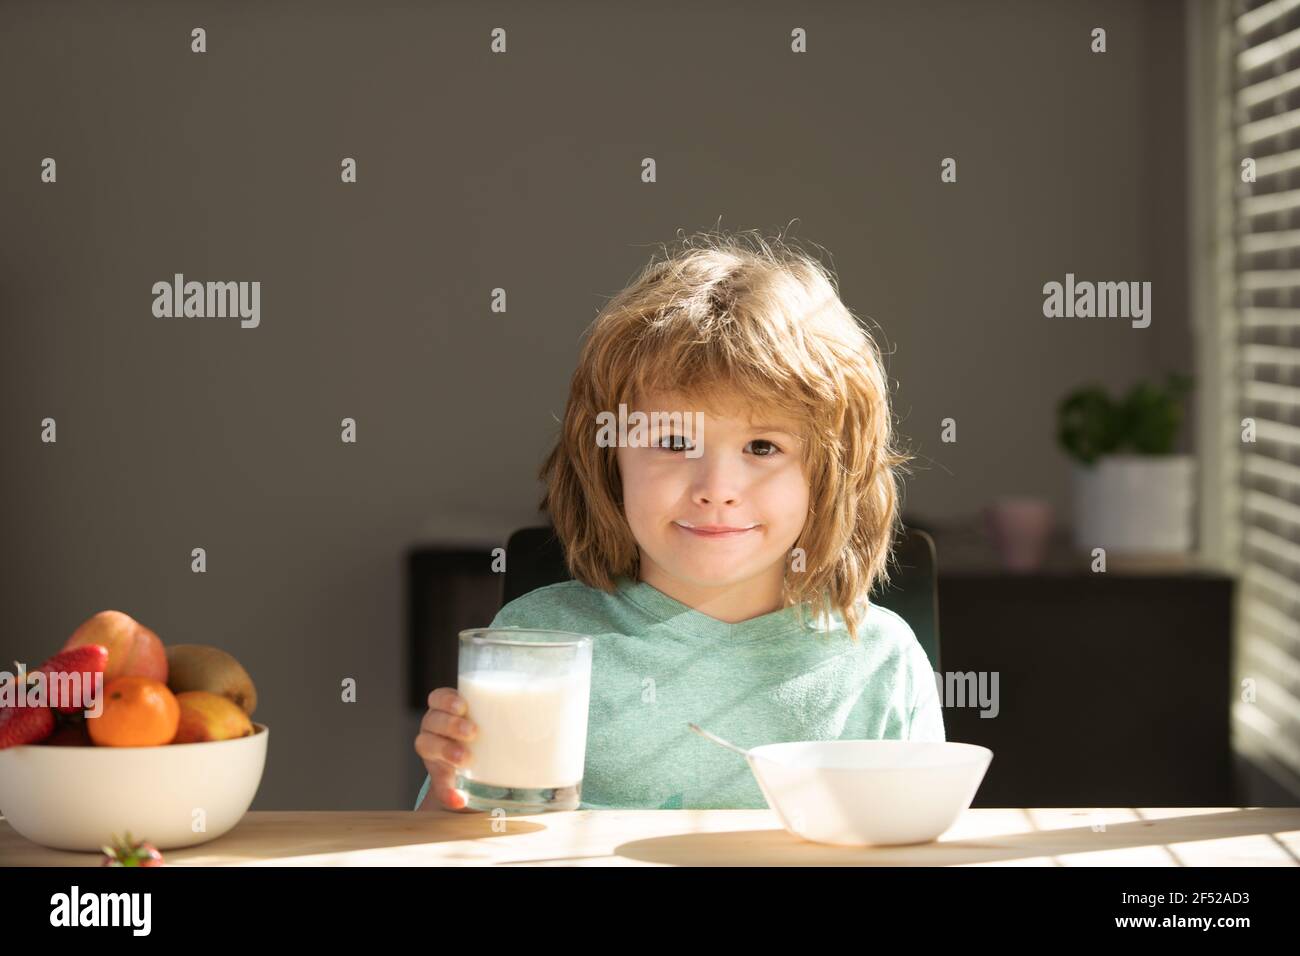 Cute child eating cereal with milk. Baby eating breakfast. Child eating healthy food. Stock Photo